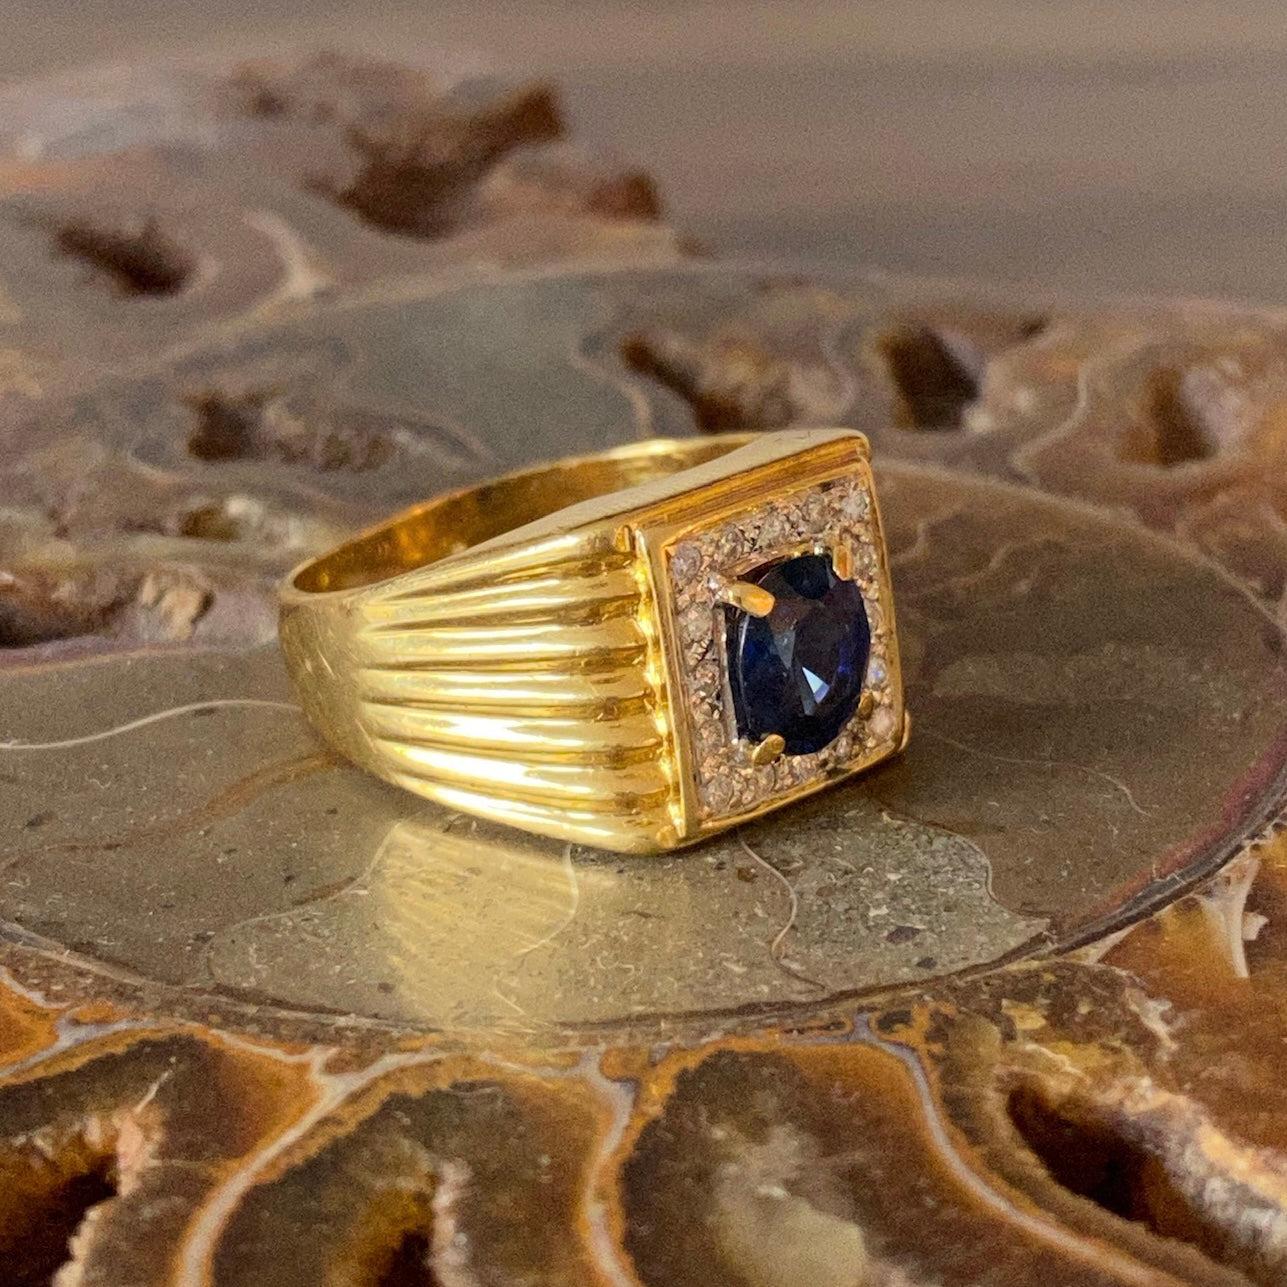 Crafted in 18K yellow gold, the ring features an oval cut blue sapphire framed by diamonds and supported by tapering fluted shoulders.
1 sapphire: 1.25ct.
16 round brilliant cut diamonds: 0.16 ctw. Color: G-H, Clarity: SI2-I1
Measurements:
Front: 13